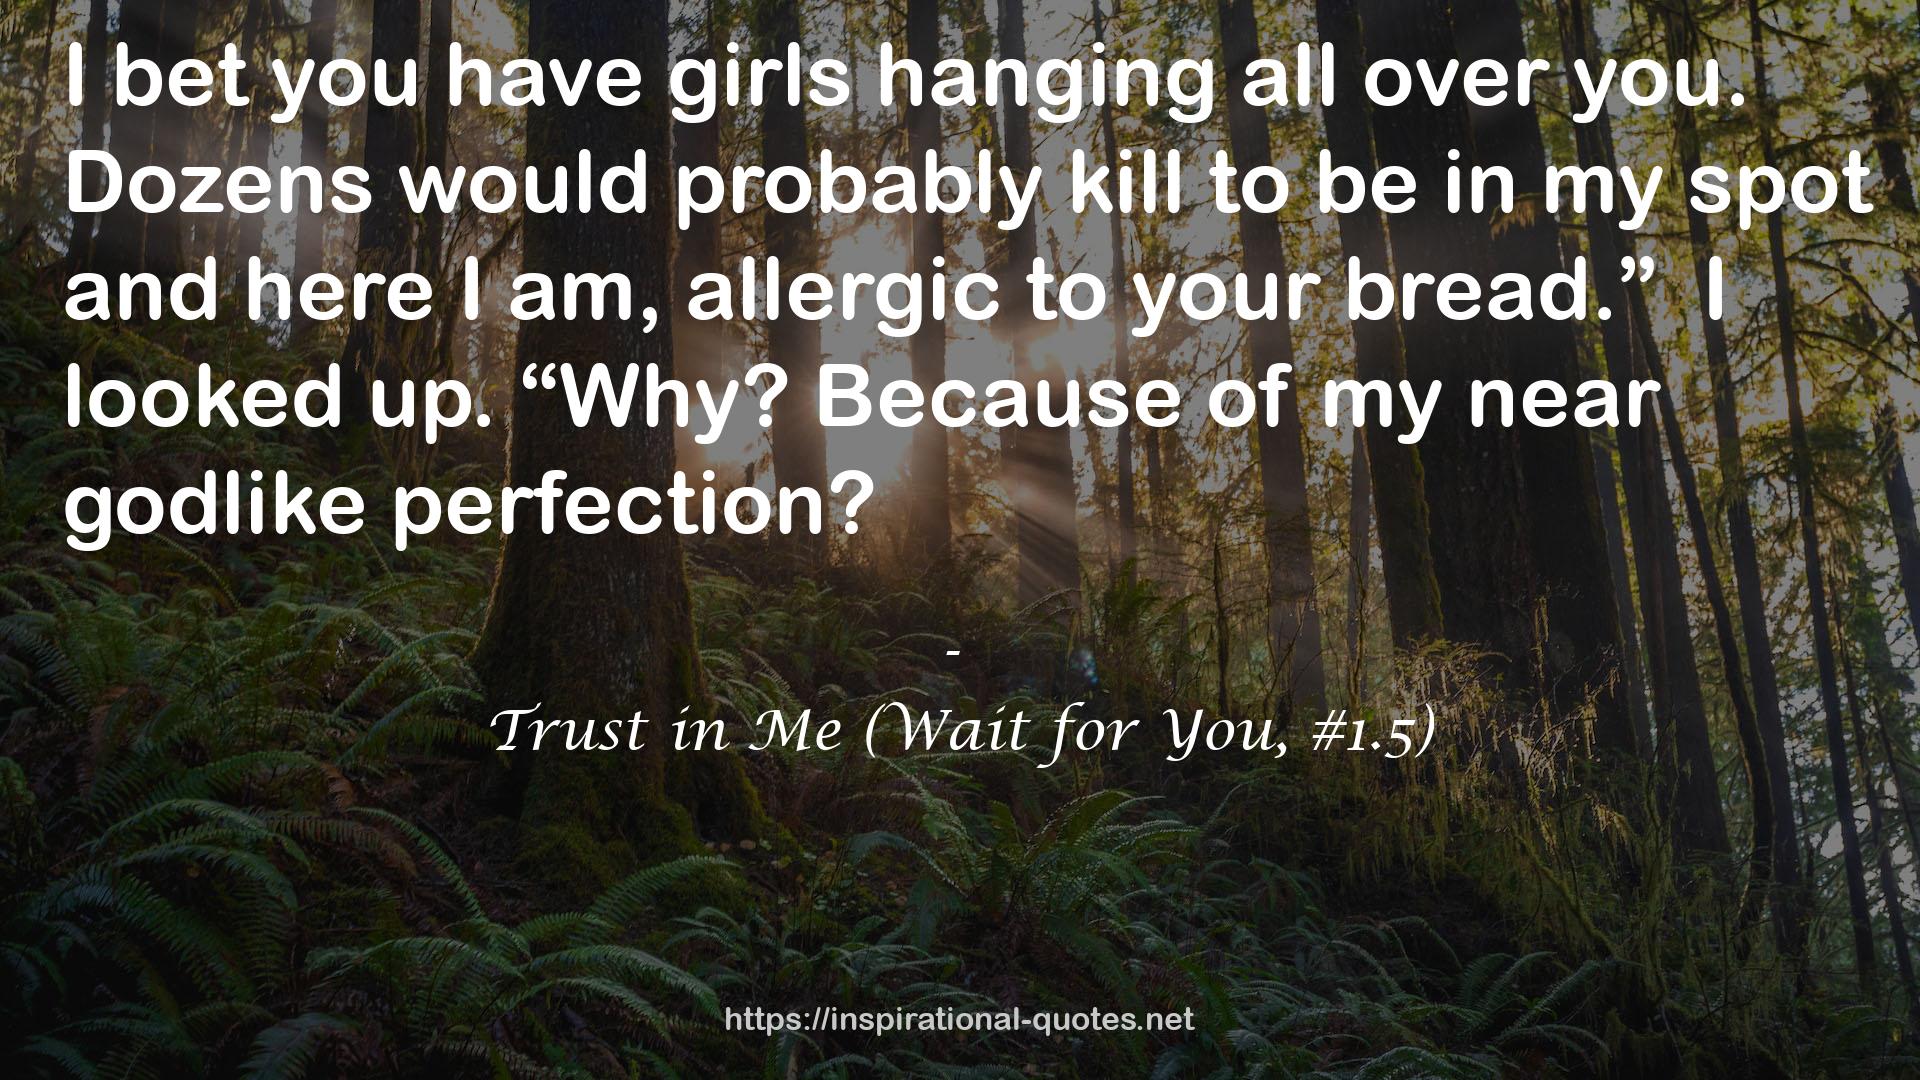 Trust in Me (Wait for You, #1.5) QUOTES